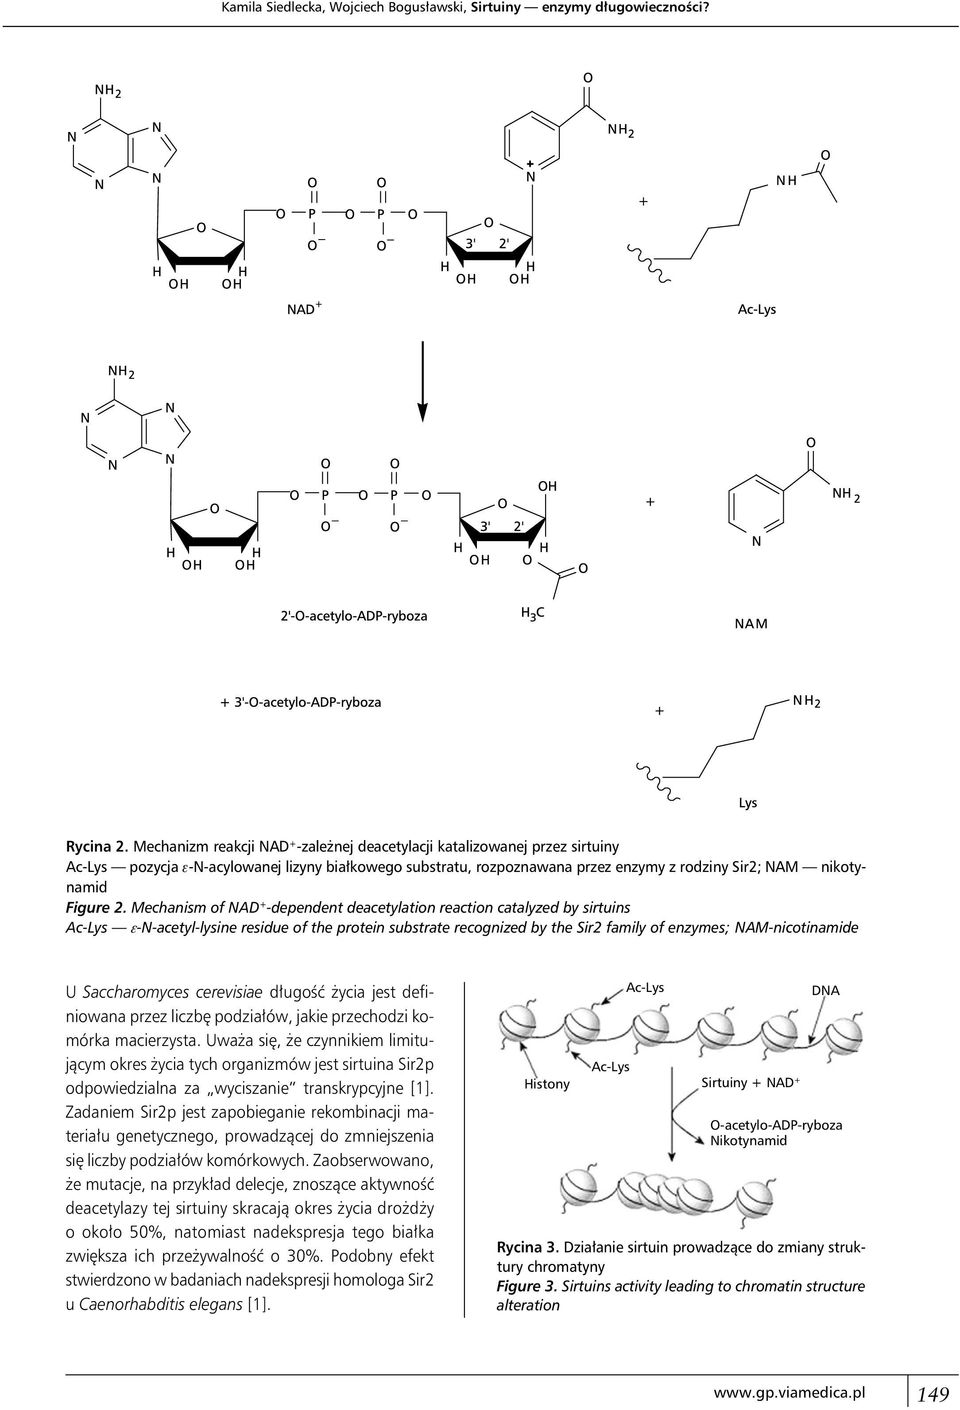 2. Mechanism of NAD + -dependent deacetylation reaction catalyzed by sirtuins Ac-Lys e-n-acetyl-lysine residue of the protein substrate recognized by the Sir2 family of enzymes; NAM-nicotinamide U